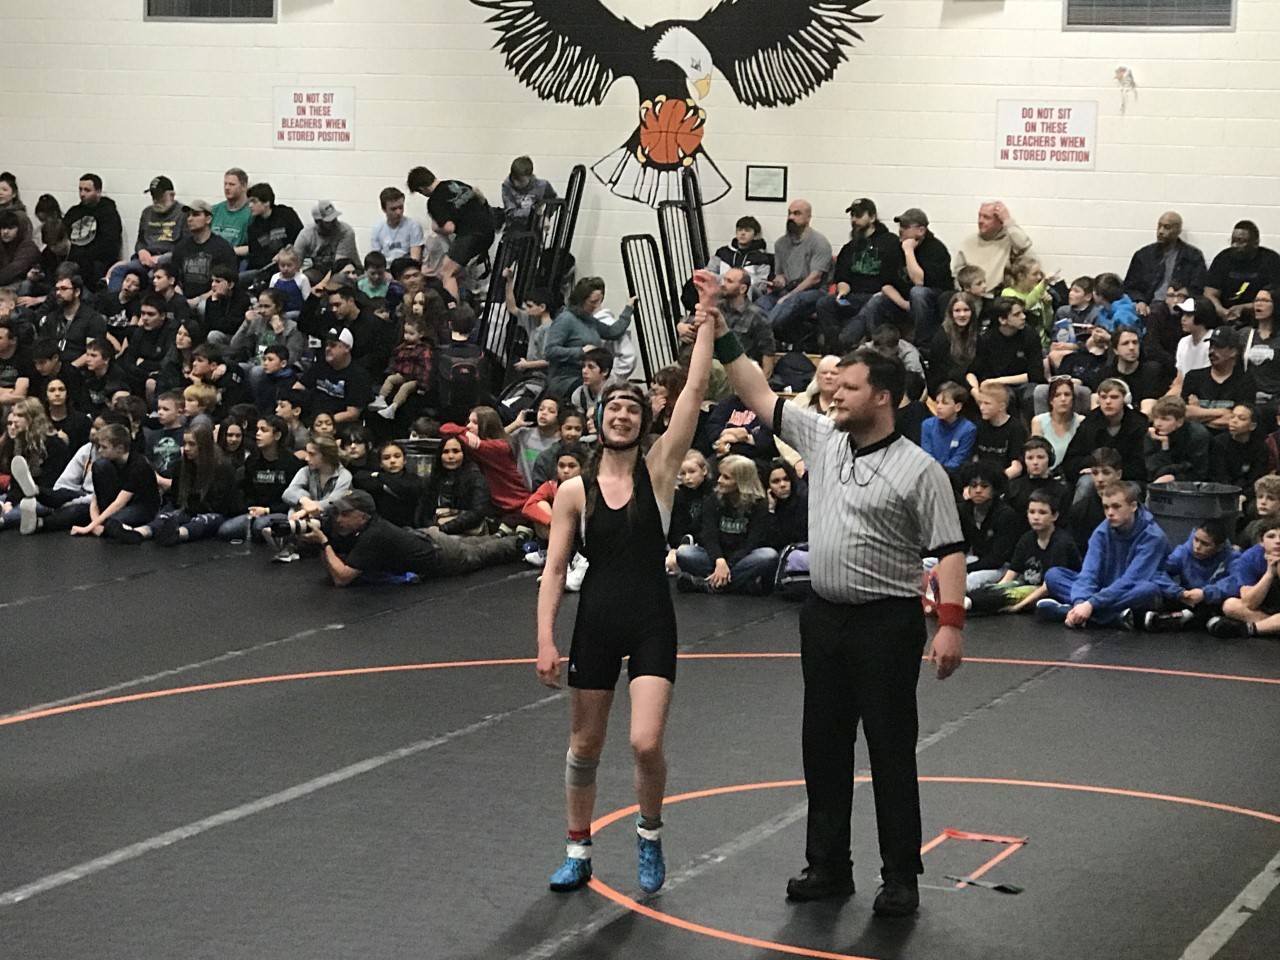 Courtesy Photos | Dana Richards                                 Above: Evelyn Richards stands with her arm raised following a match at the Middle School State Wrestling Championship in Fairbanks.